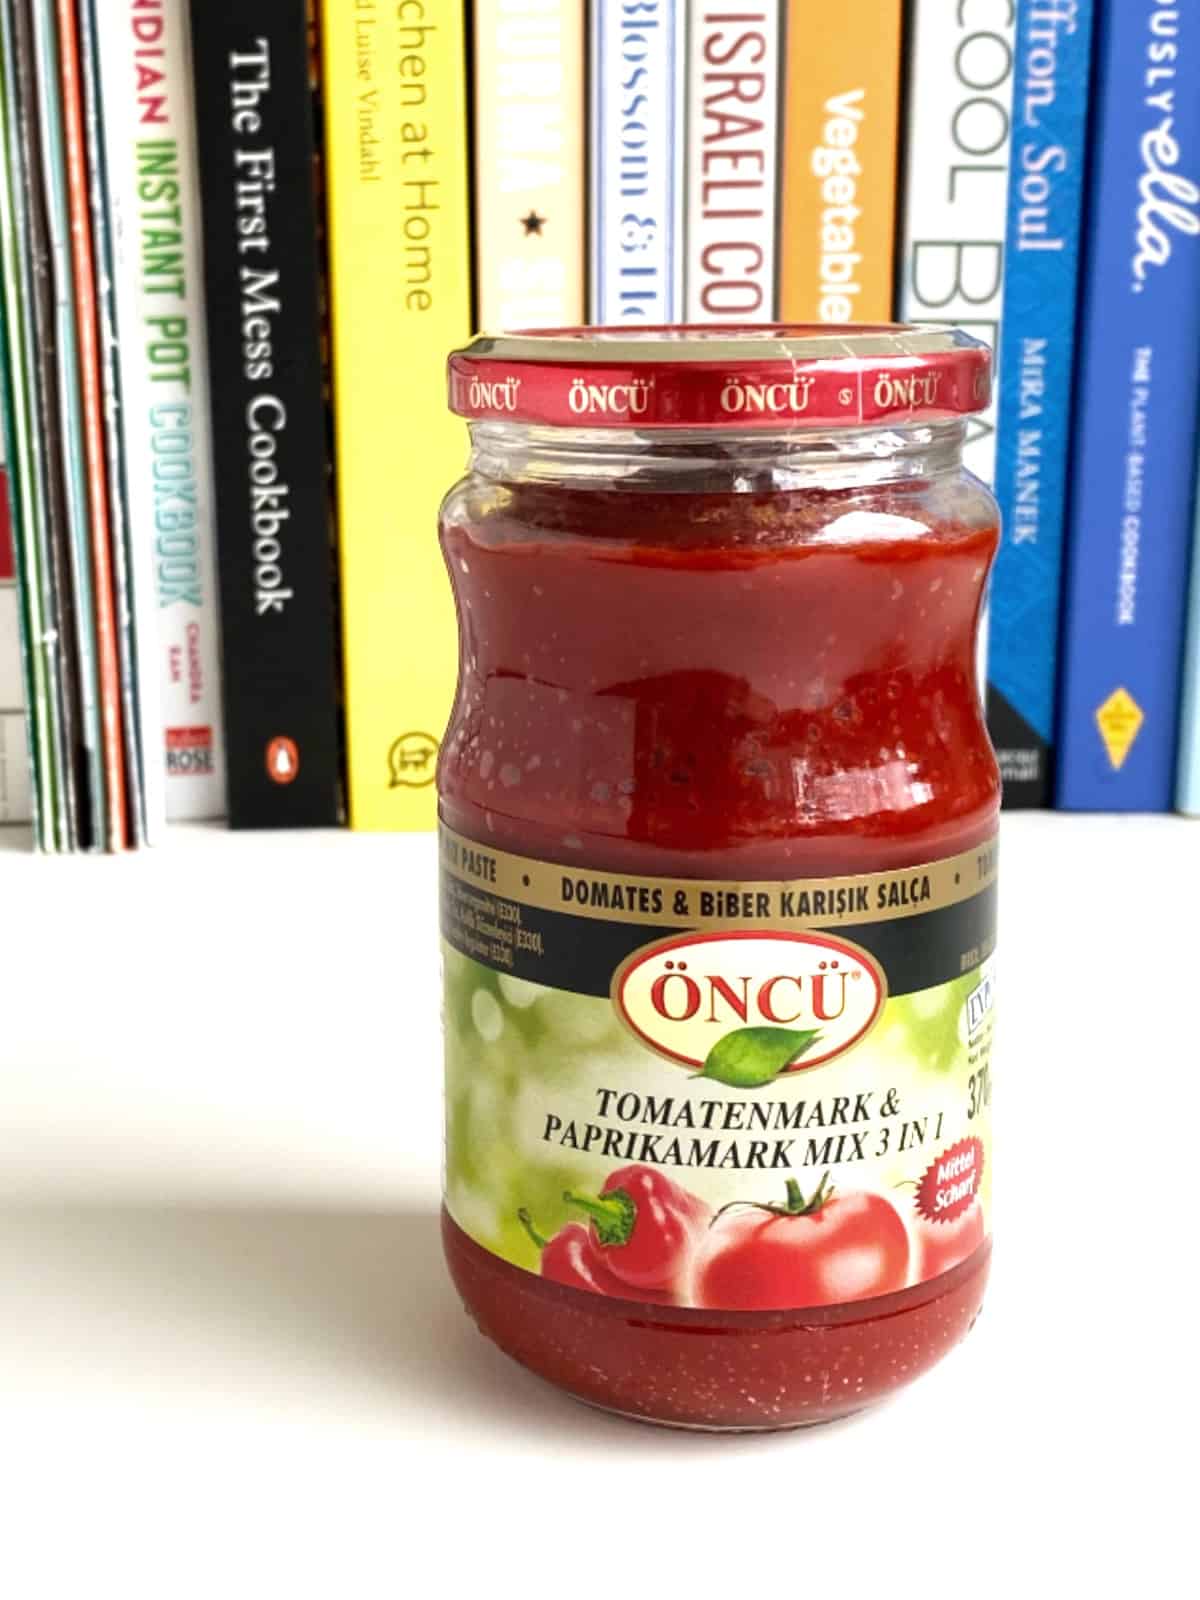 A photo of a glass jar of Turkish Tomato and Pepper Paste.